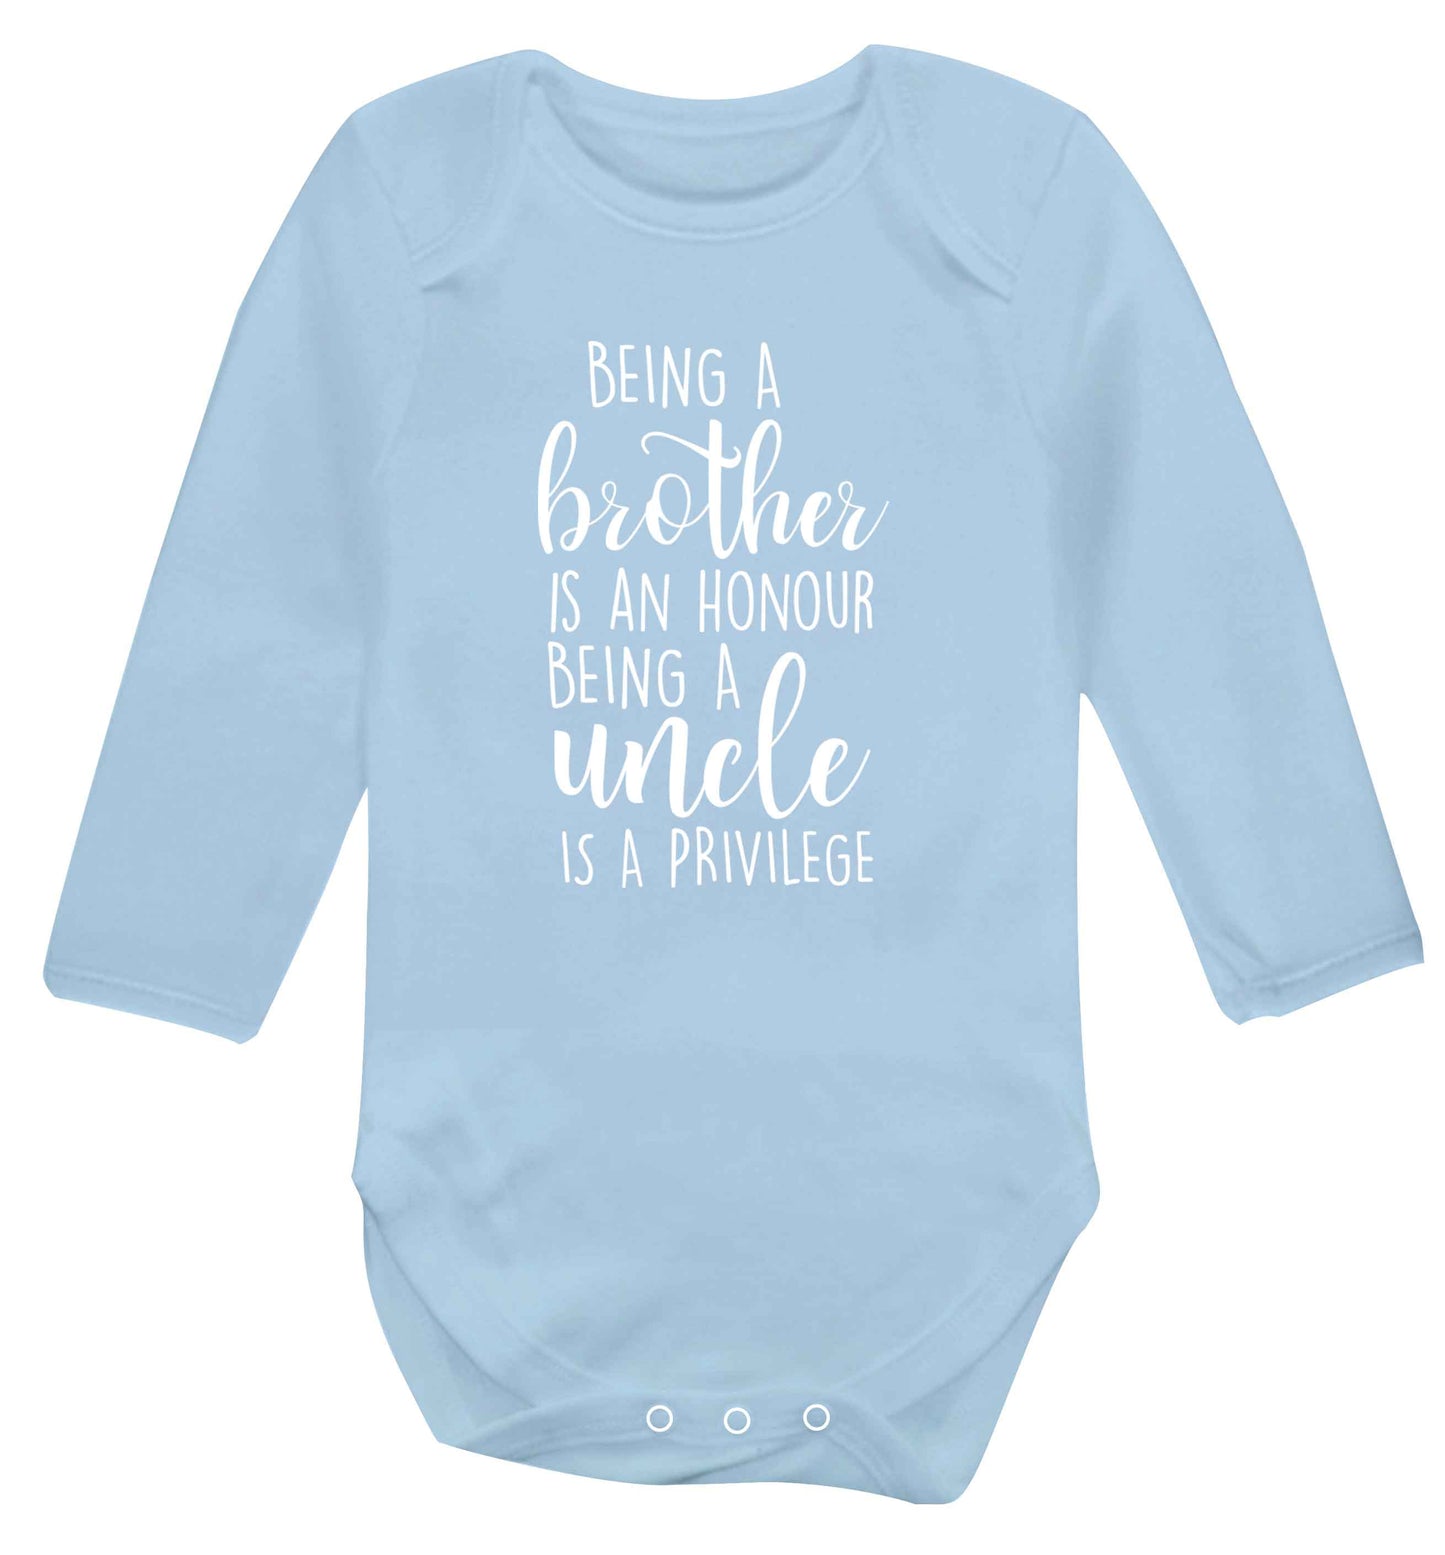 Being a brother is an honour being an uncle is a privilege Baby Vest long sleeved pale blue 6-12 months